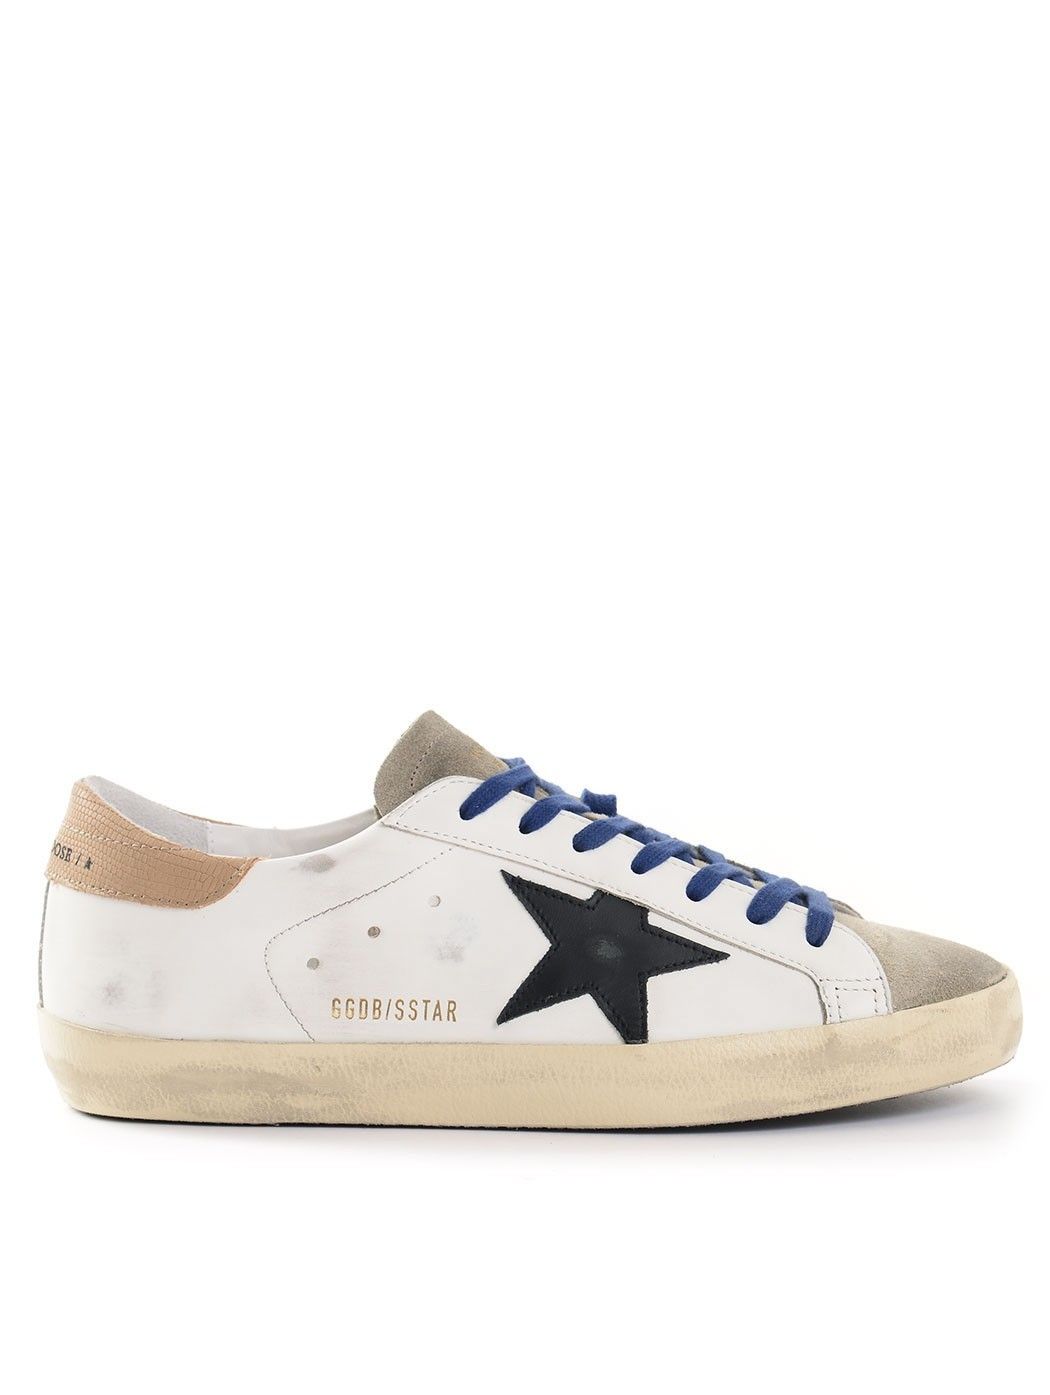  MAN SHOES,SPRING SUMMER SHOES,CHURCH'S SHOES,DIADORA HERITAGE SHOES,DIADORA HERITAGE SNEAKERS,GOLDEN GOOSE SHOES,GOLDEN GOOSE SNEAKERS  GOLDEN GOOSE GMF00101